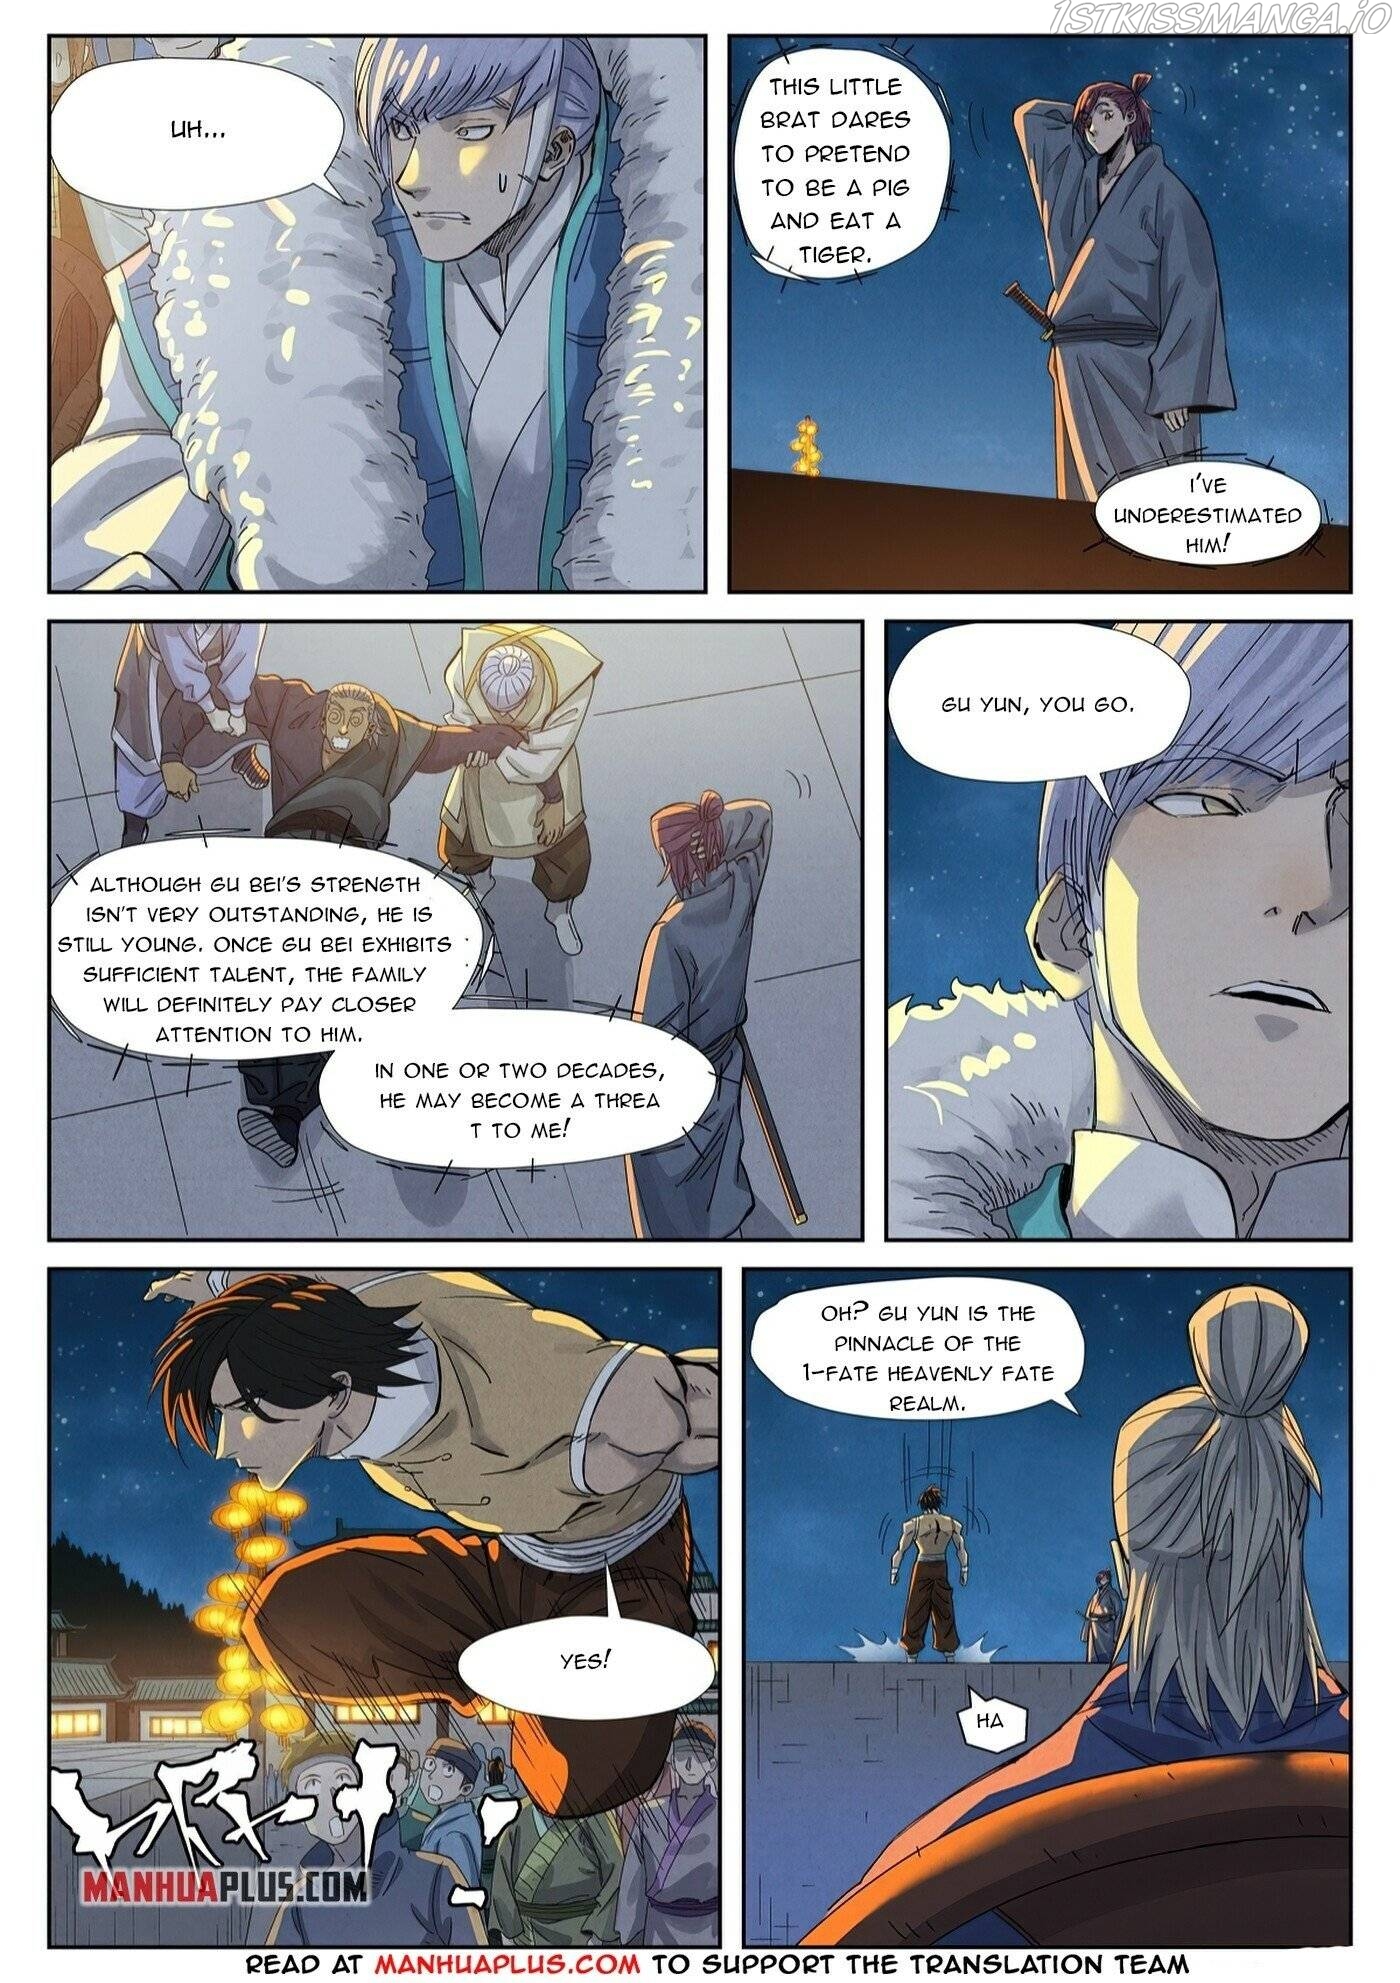 Tales of Demons and Gods Manhua Chapter 349.5 - Page 4